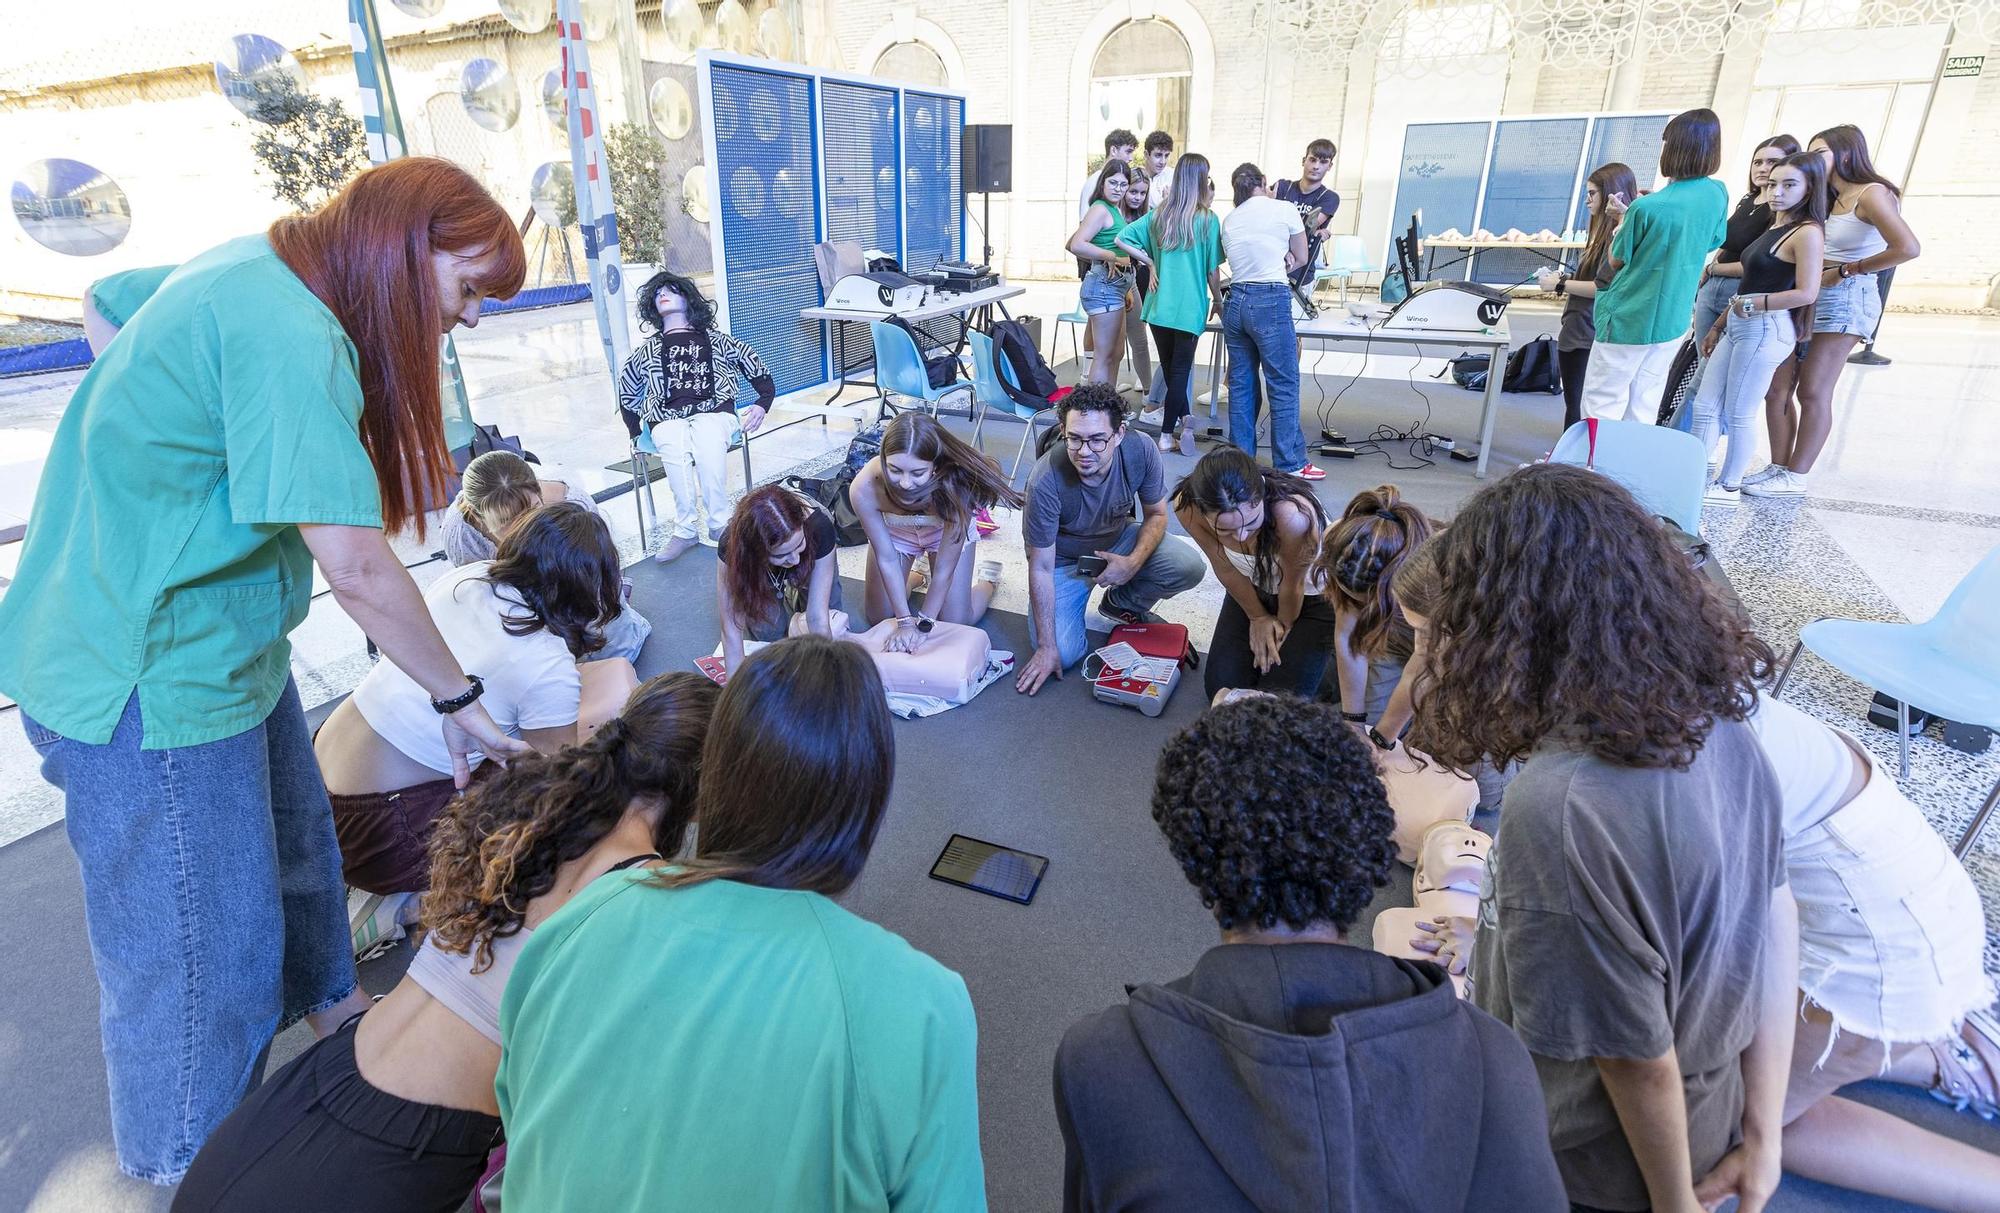 Science is open to young people at Casa Mediterraneo